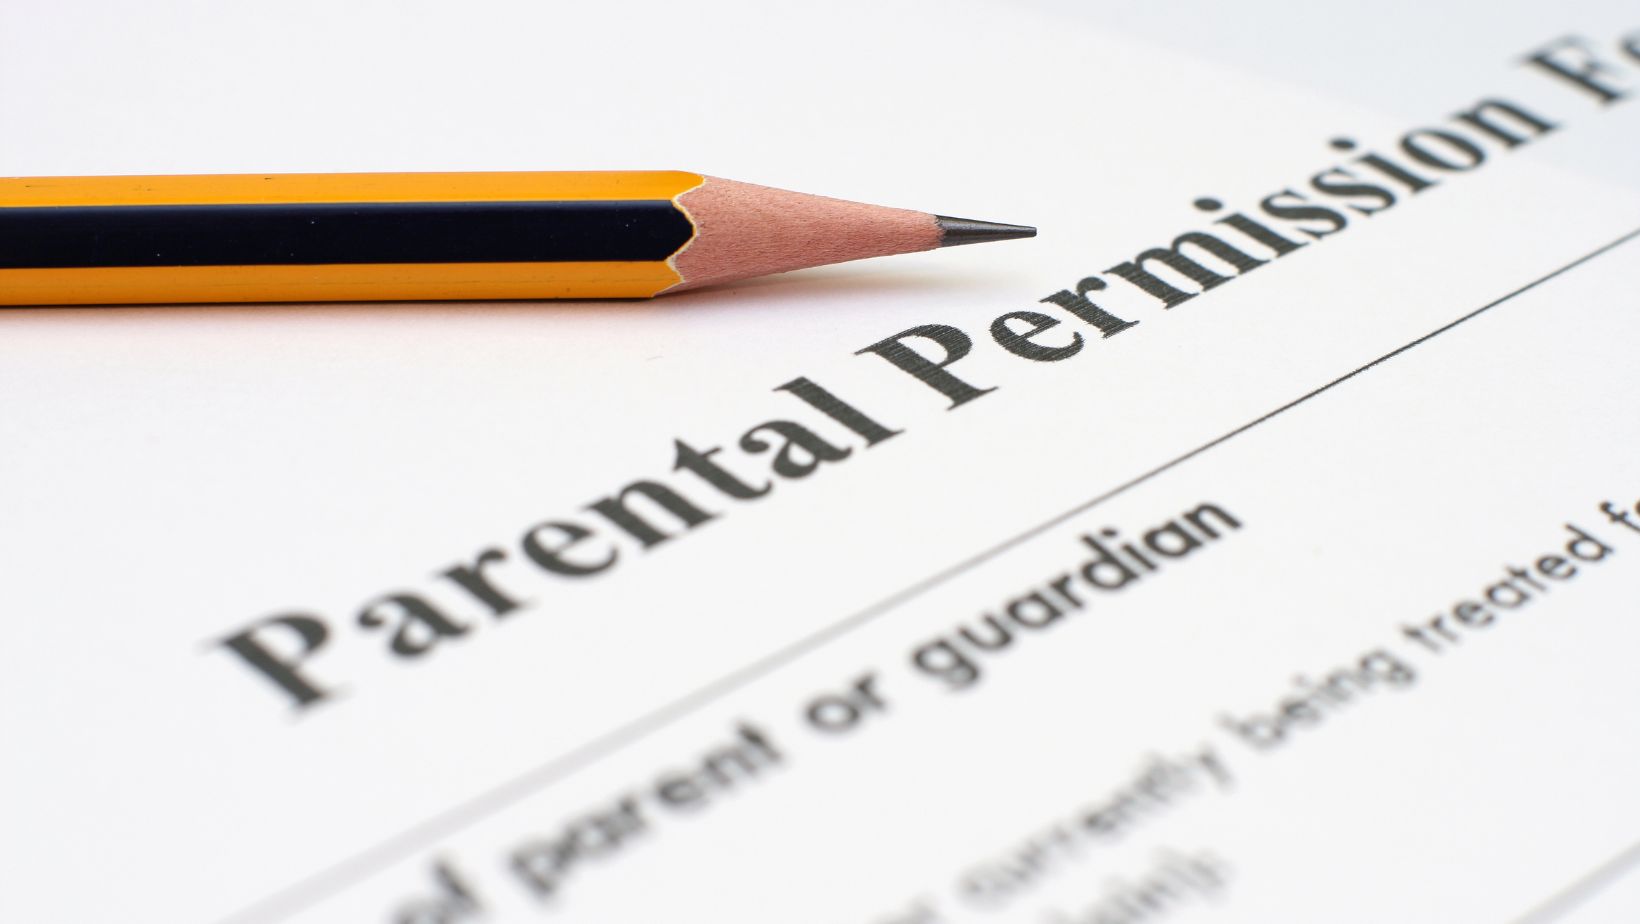 parental notification, in lieu of active parental permission, is allowed when